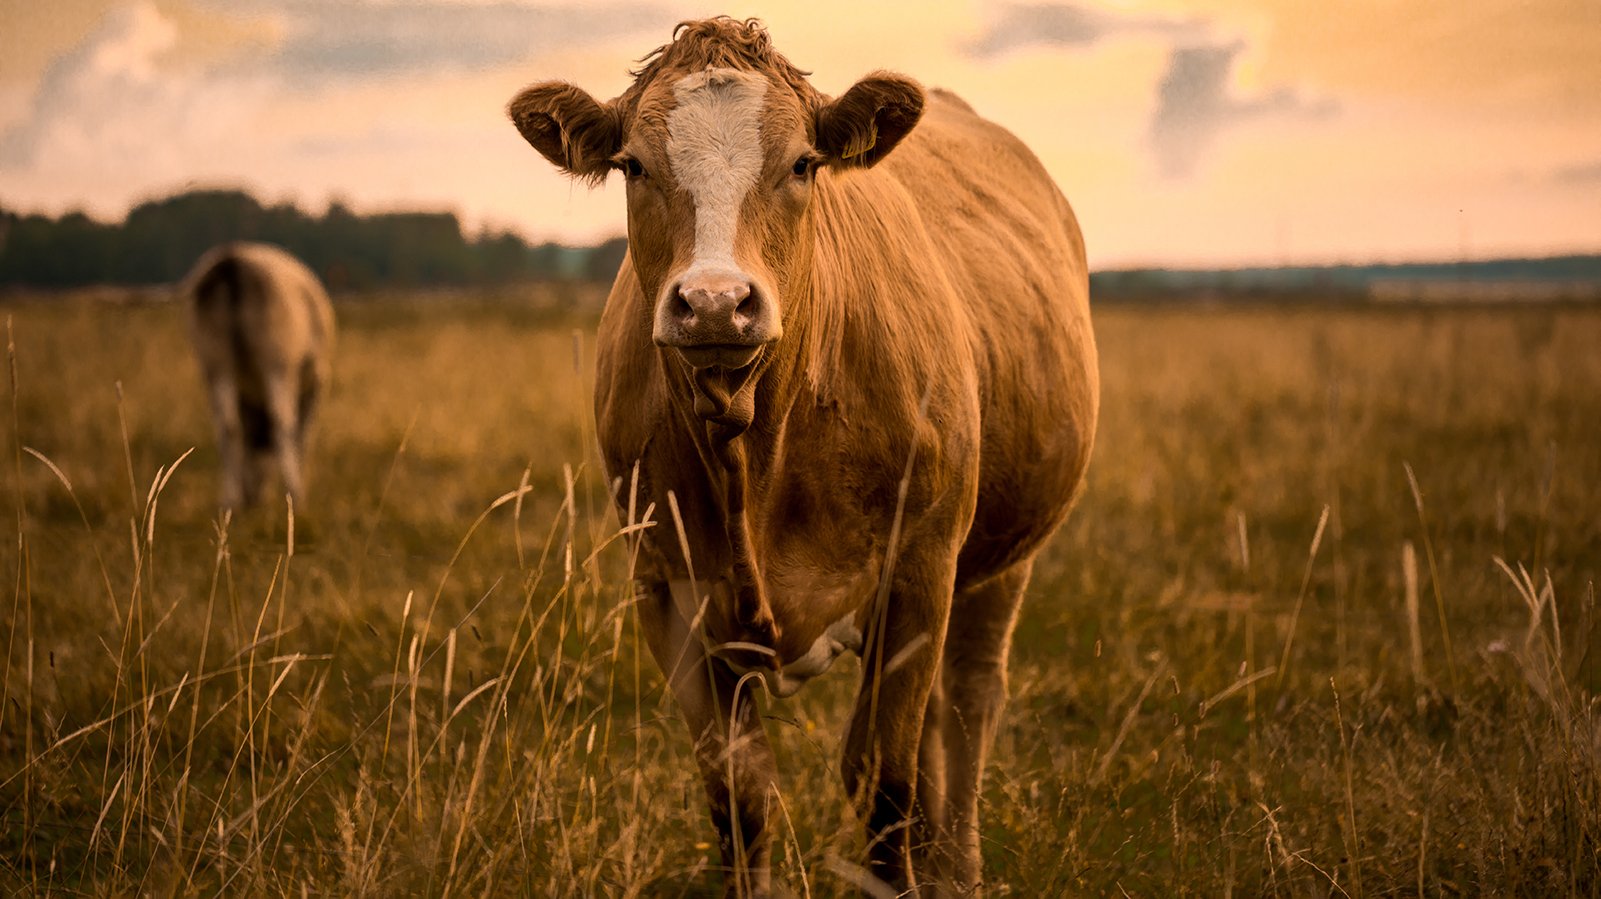 Animal Agriculture Responsible For 87% Of Greenhouse Gas Emissions - Plant  Based News